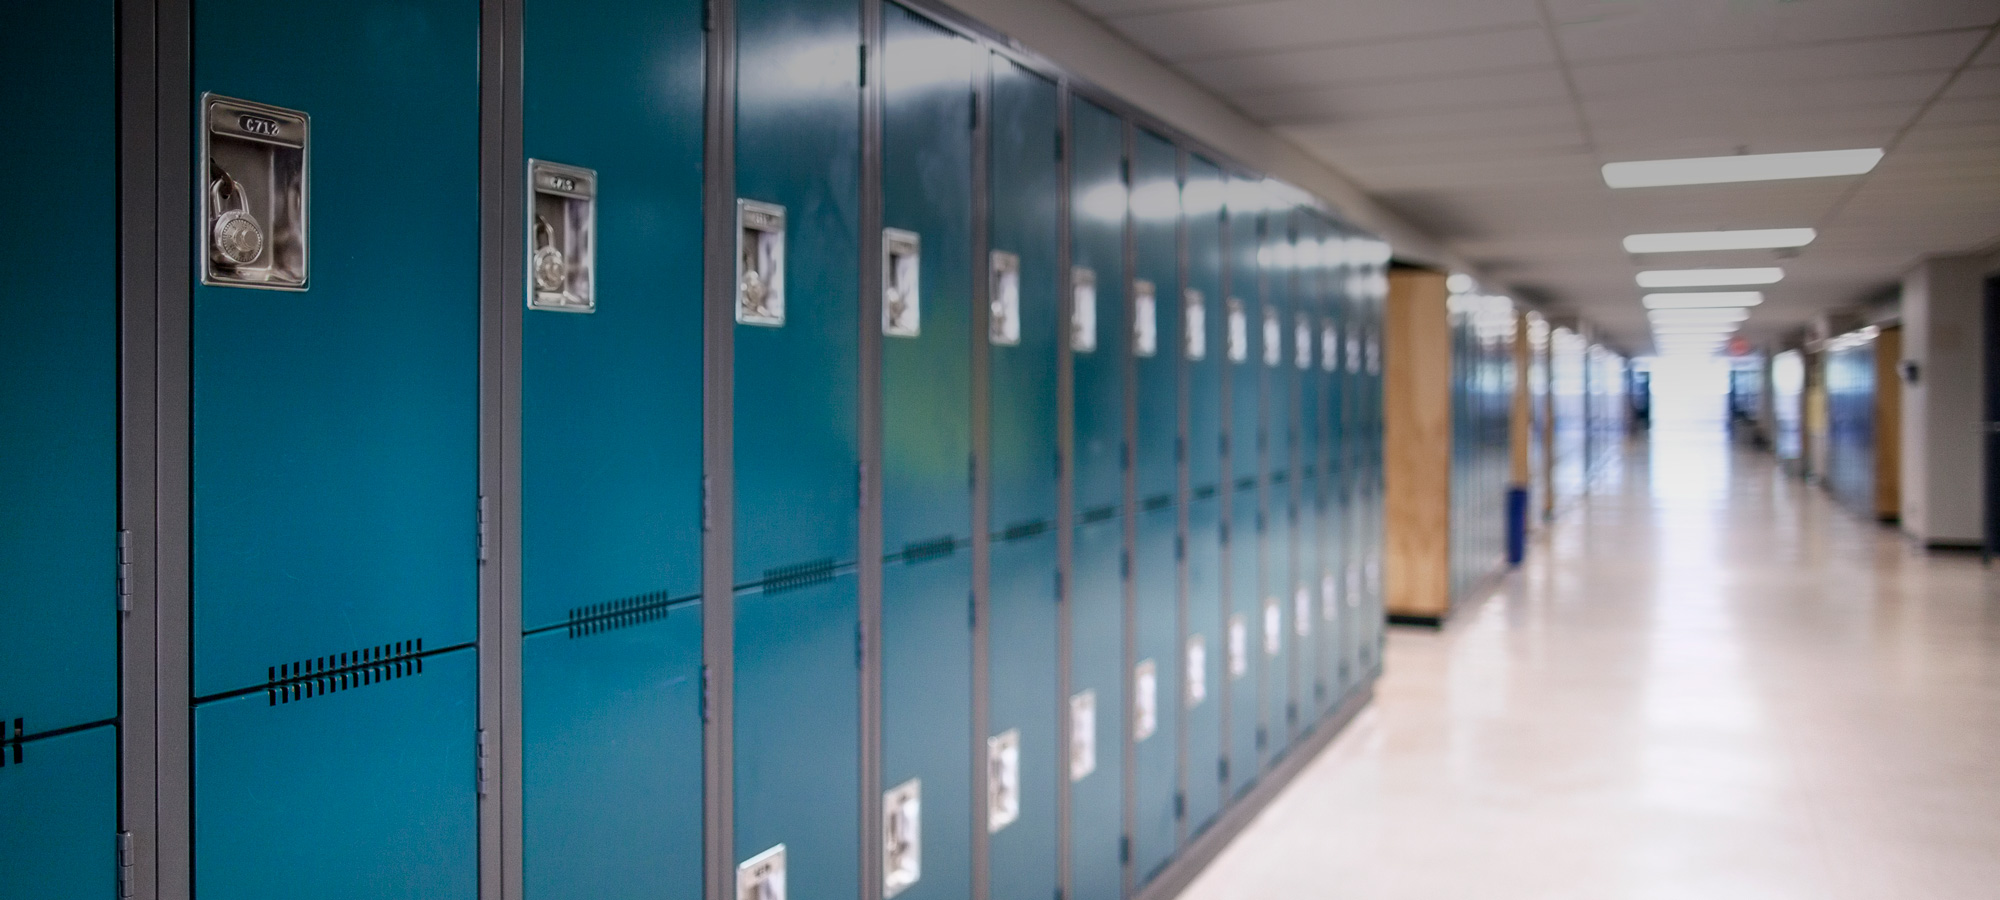 photo - Close up of a row of school lockers